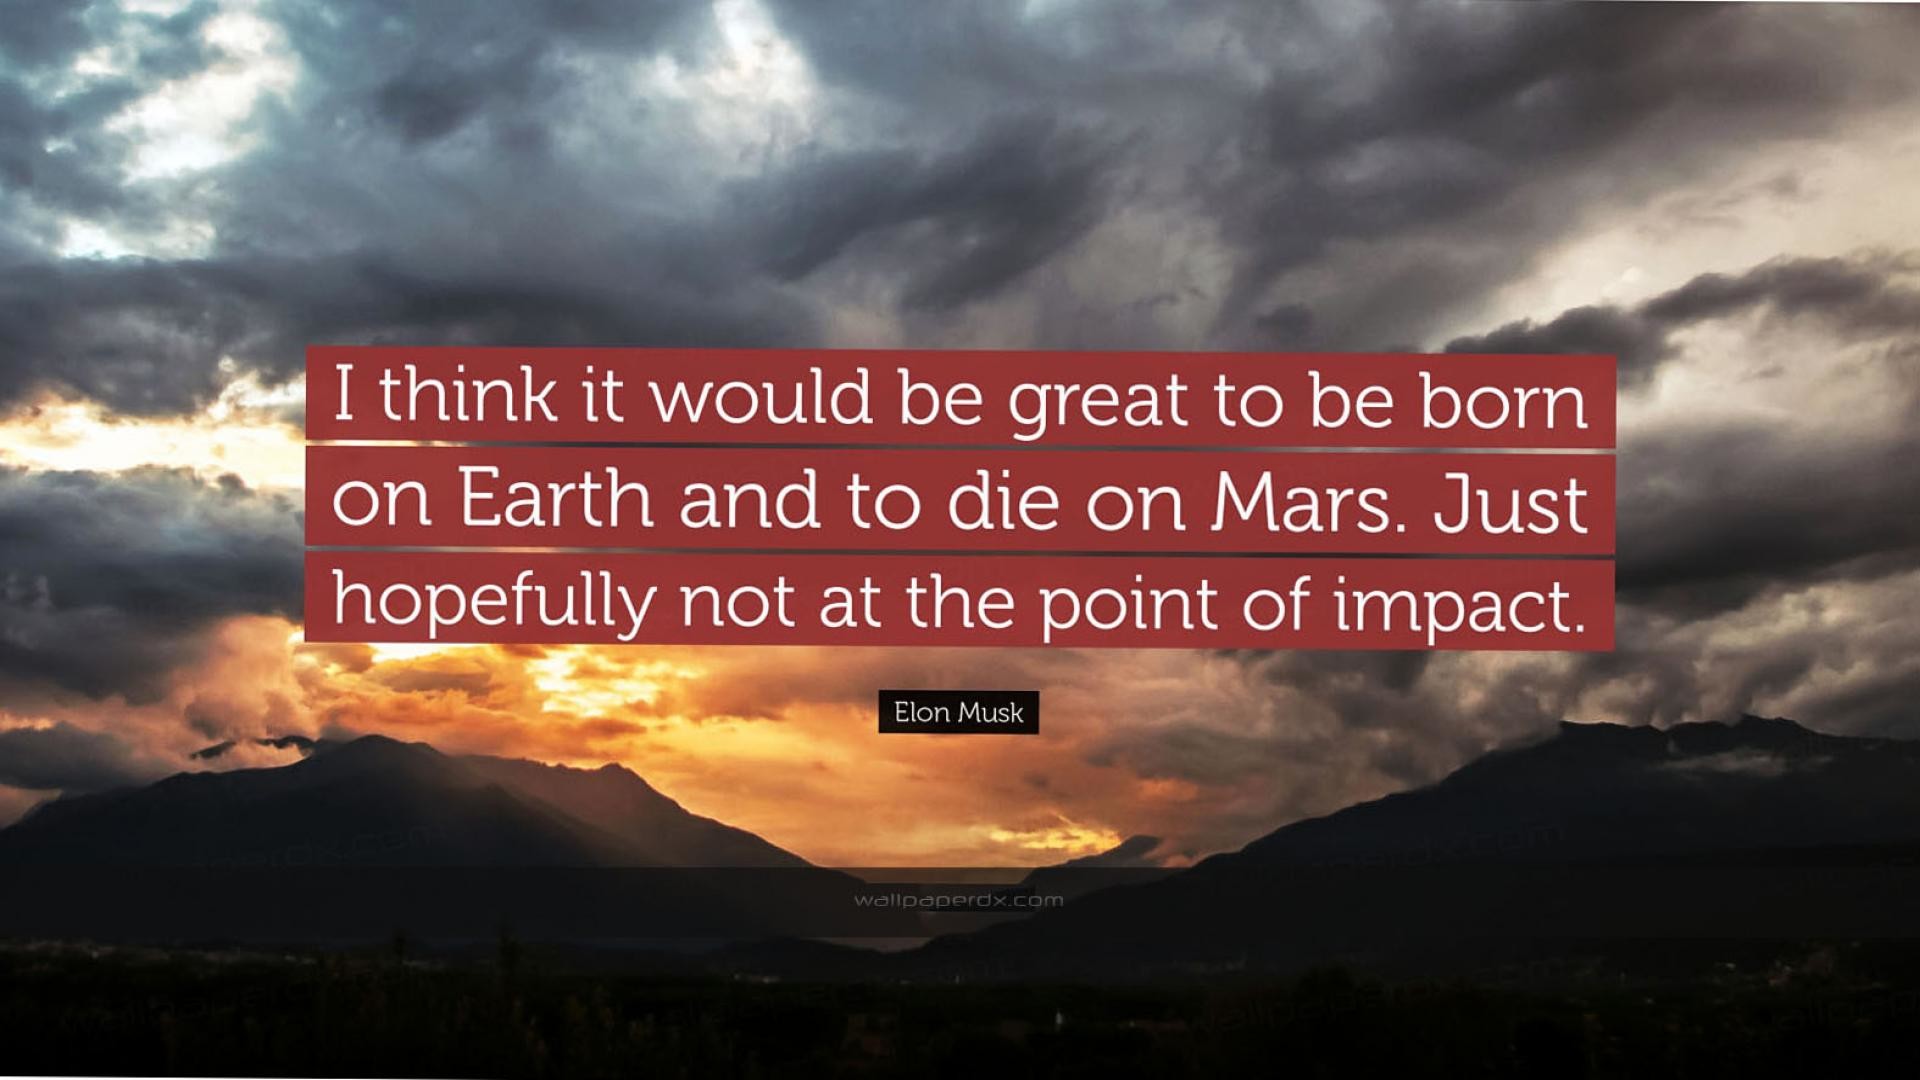 2312 elon musk quote i think it would be great to be born on earth and hd wallpaper – 1920 x 1080